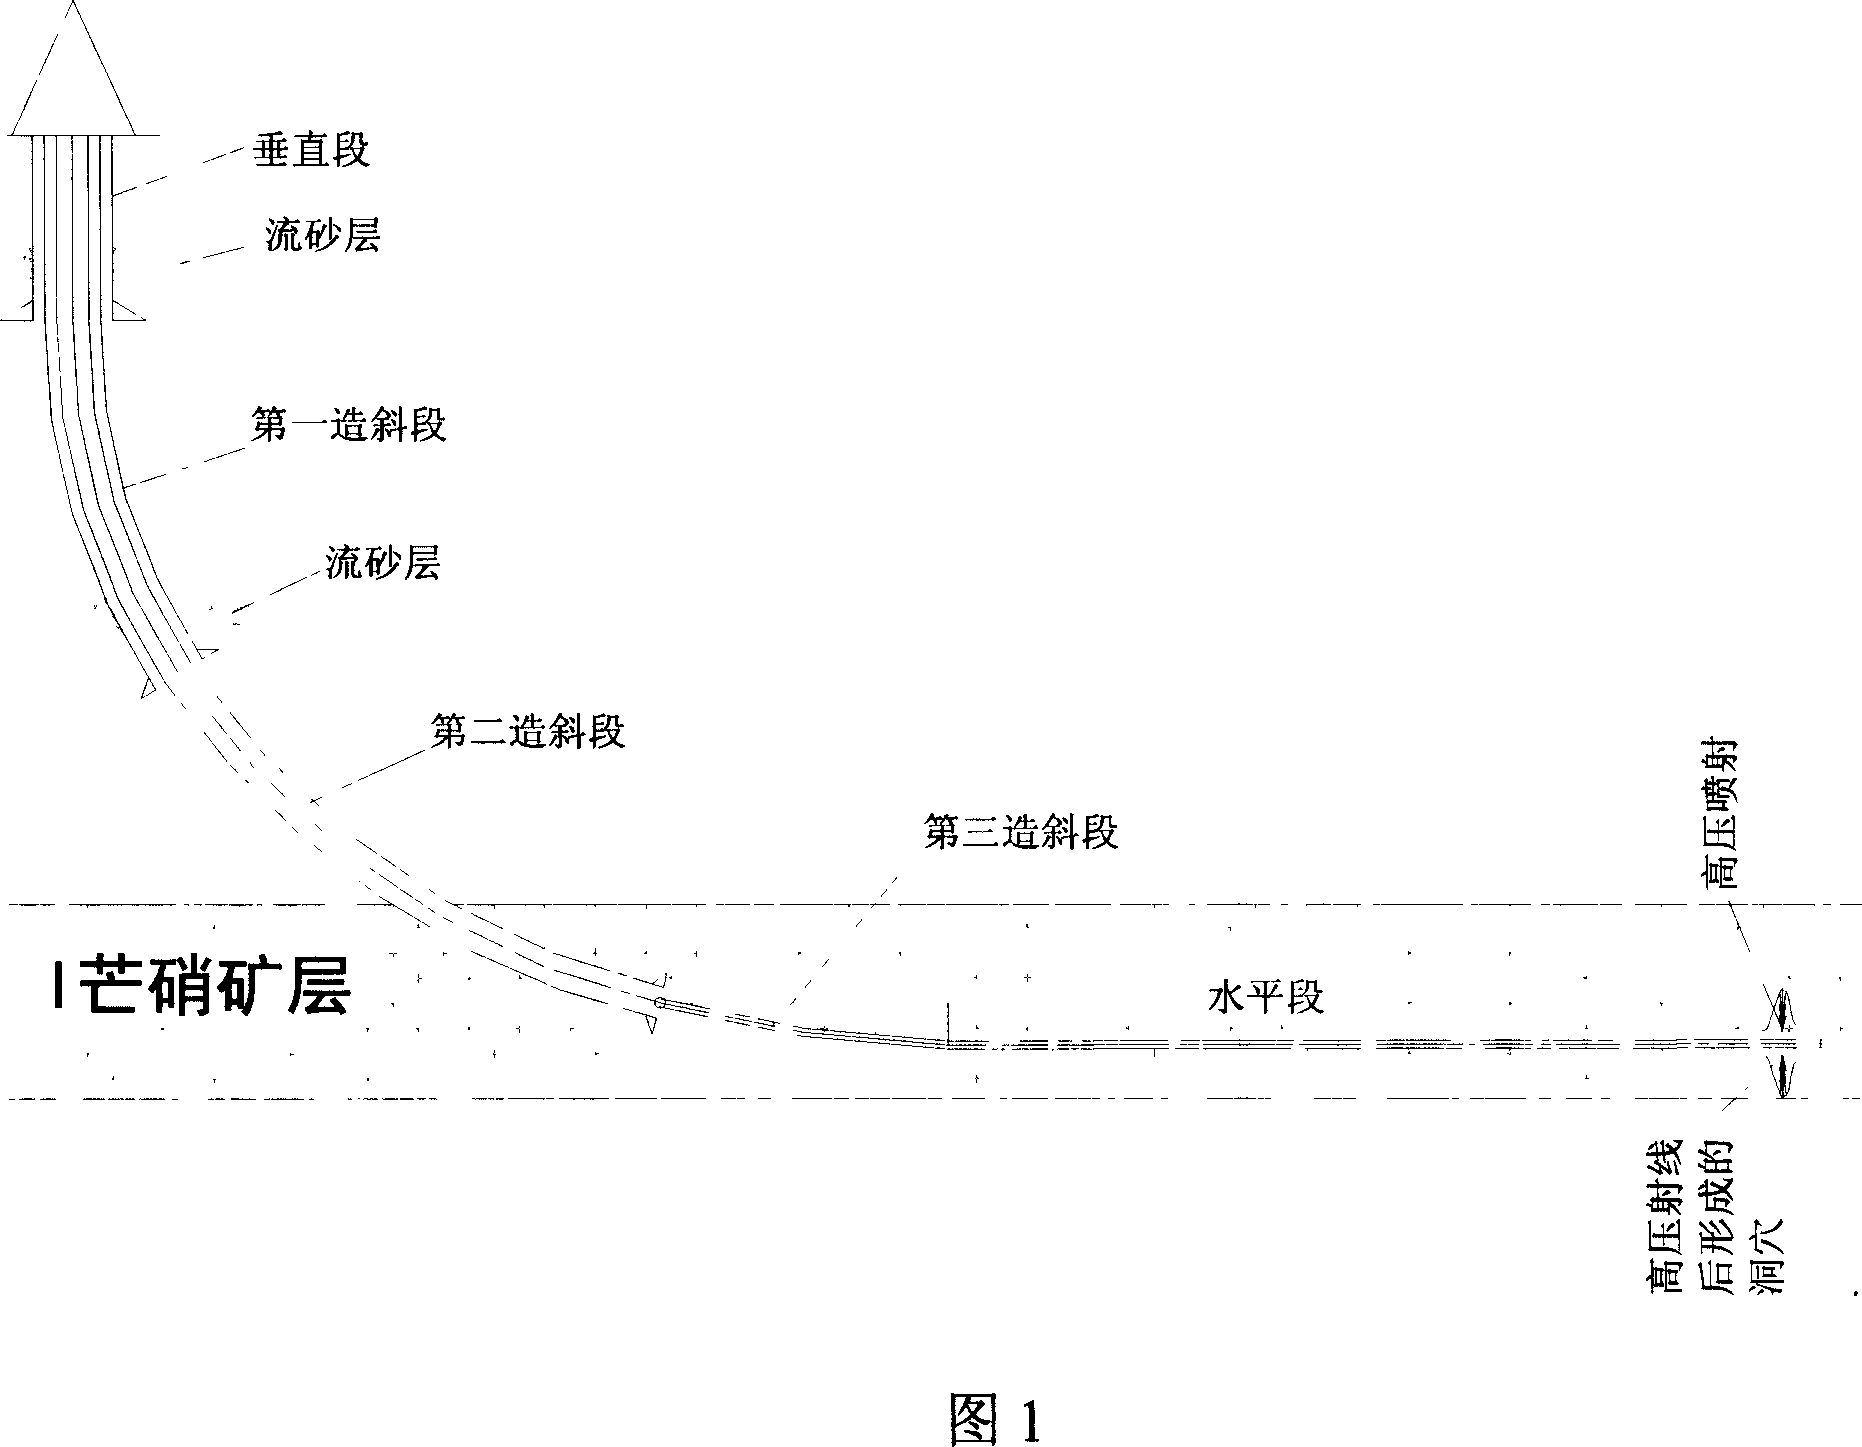 End-to-end jointing water soluble exploitation method of mirabilite mine